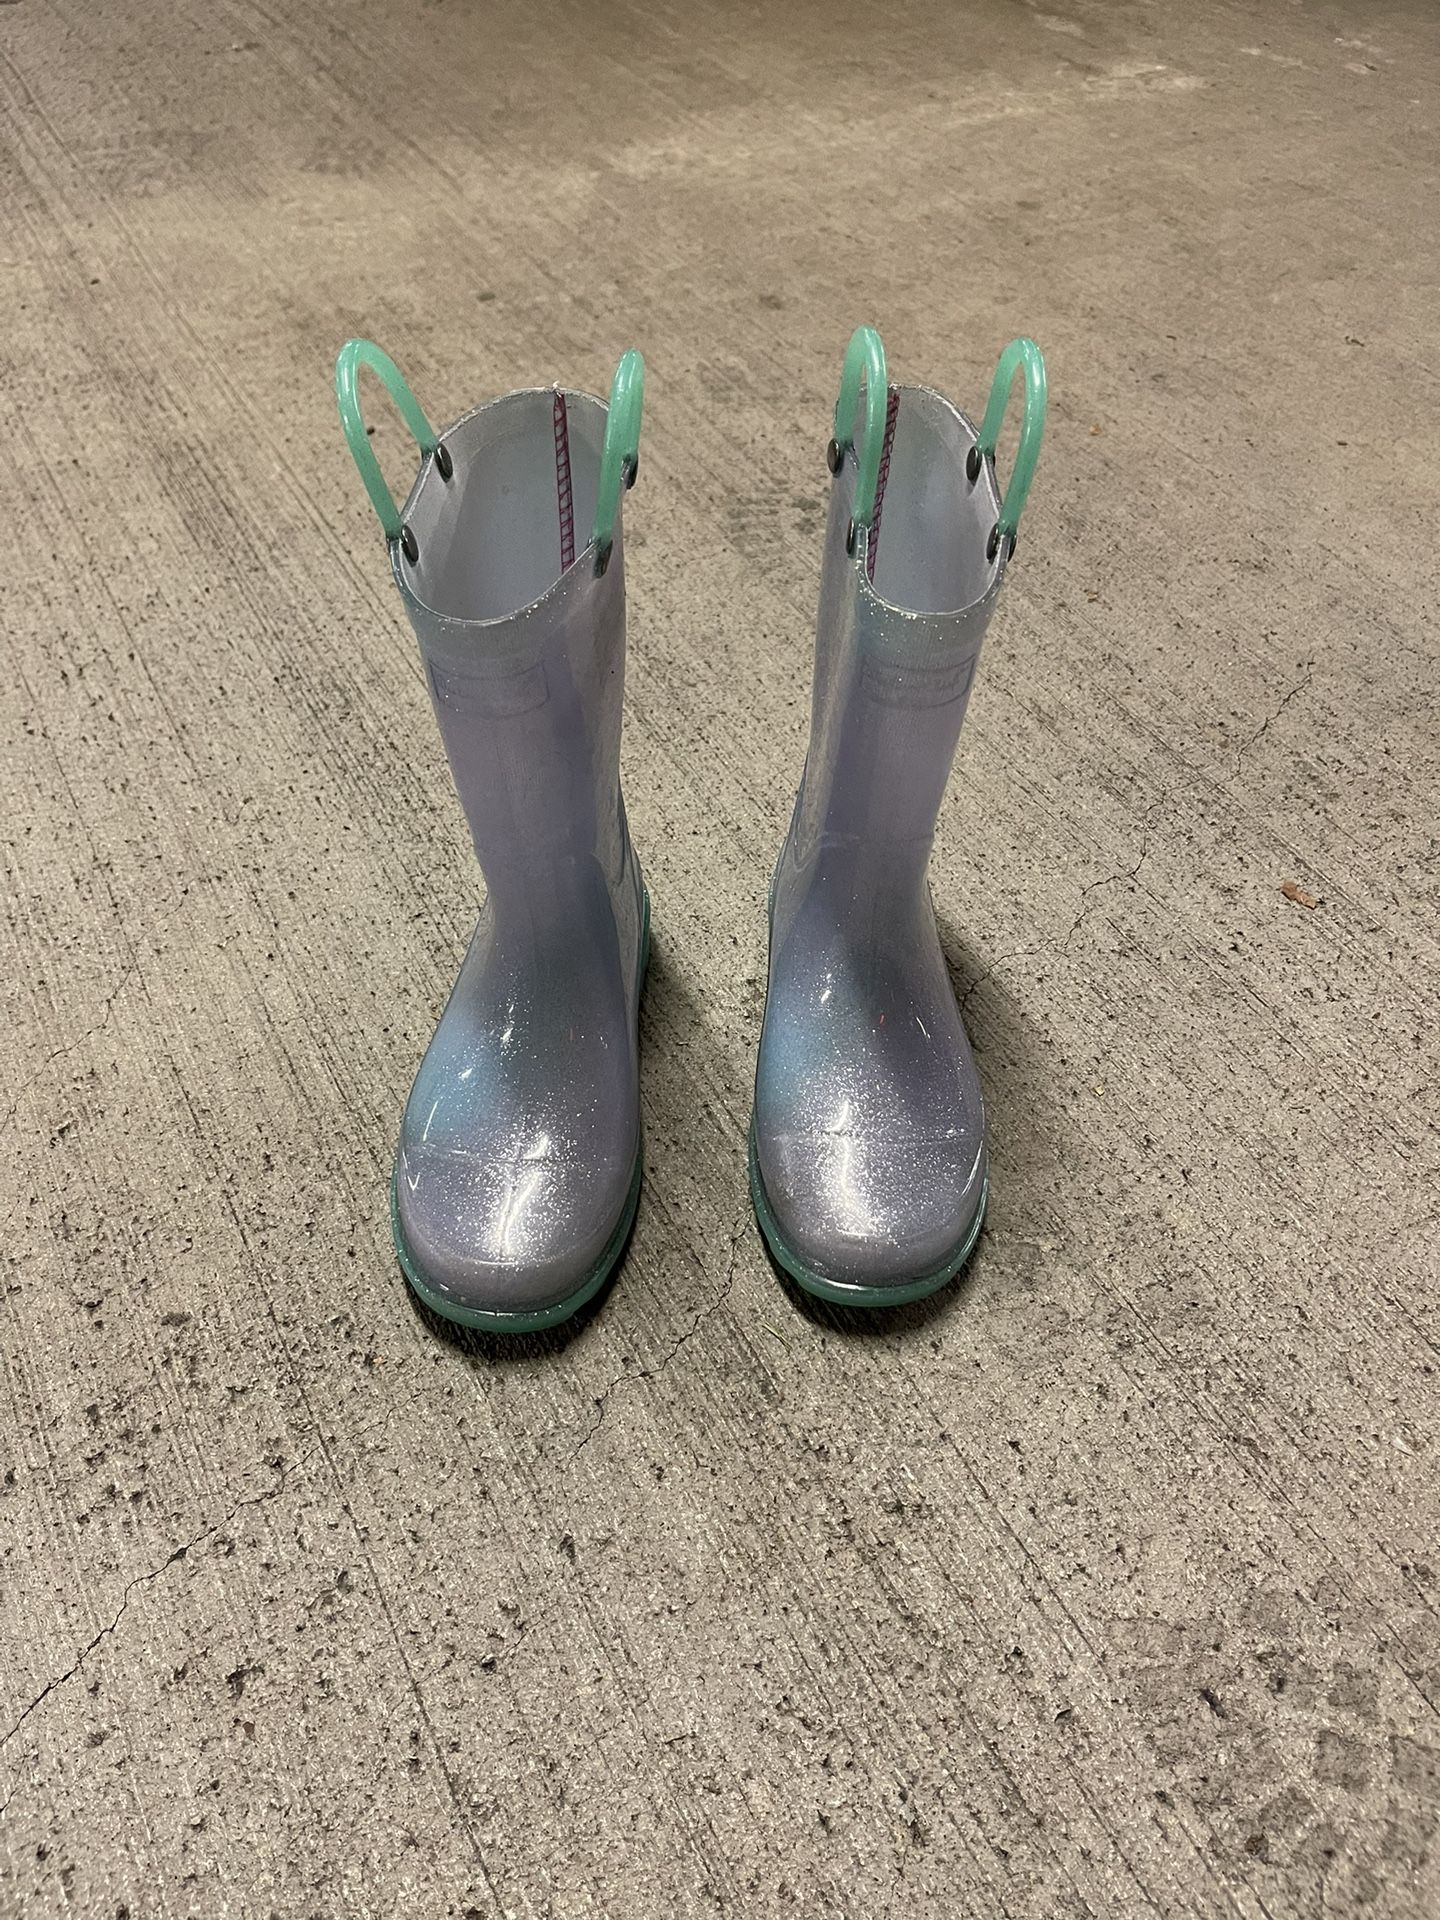 Western Chief Light Up Rain Boots Size 12